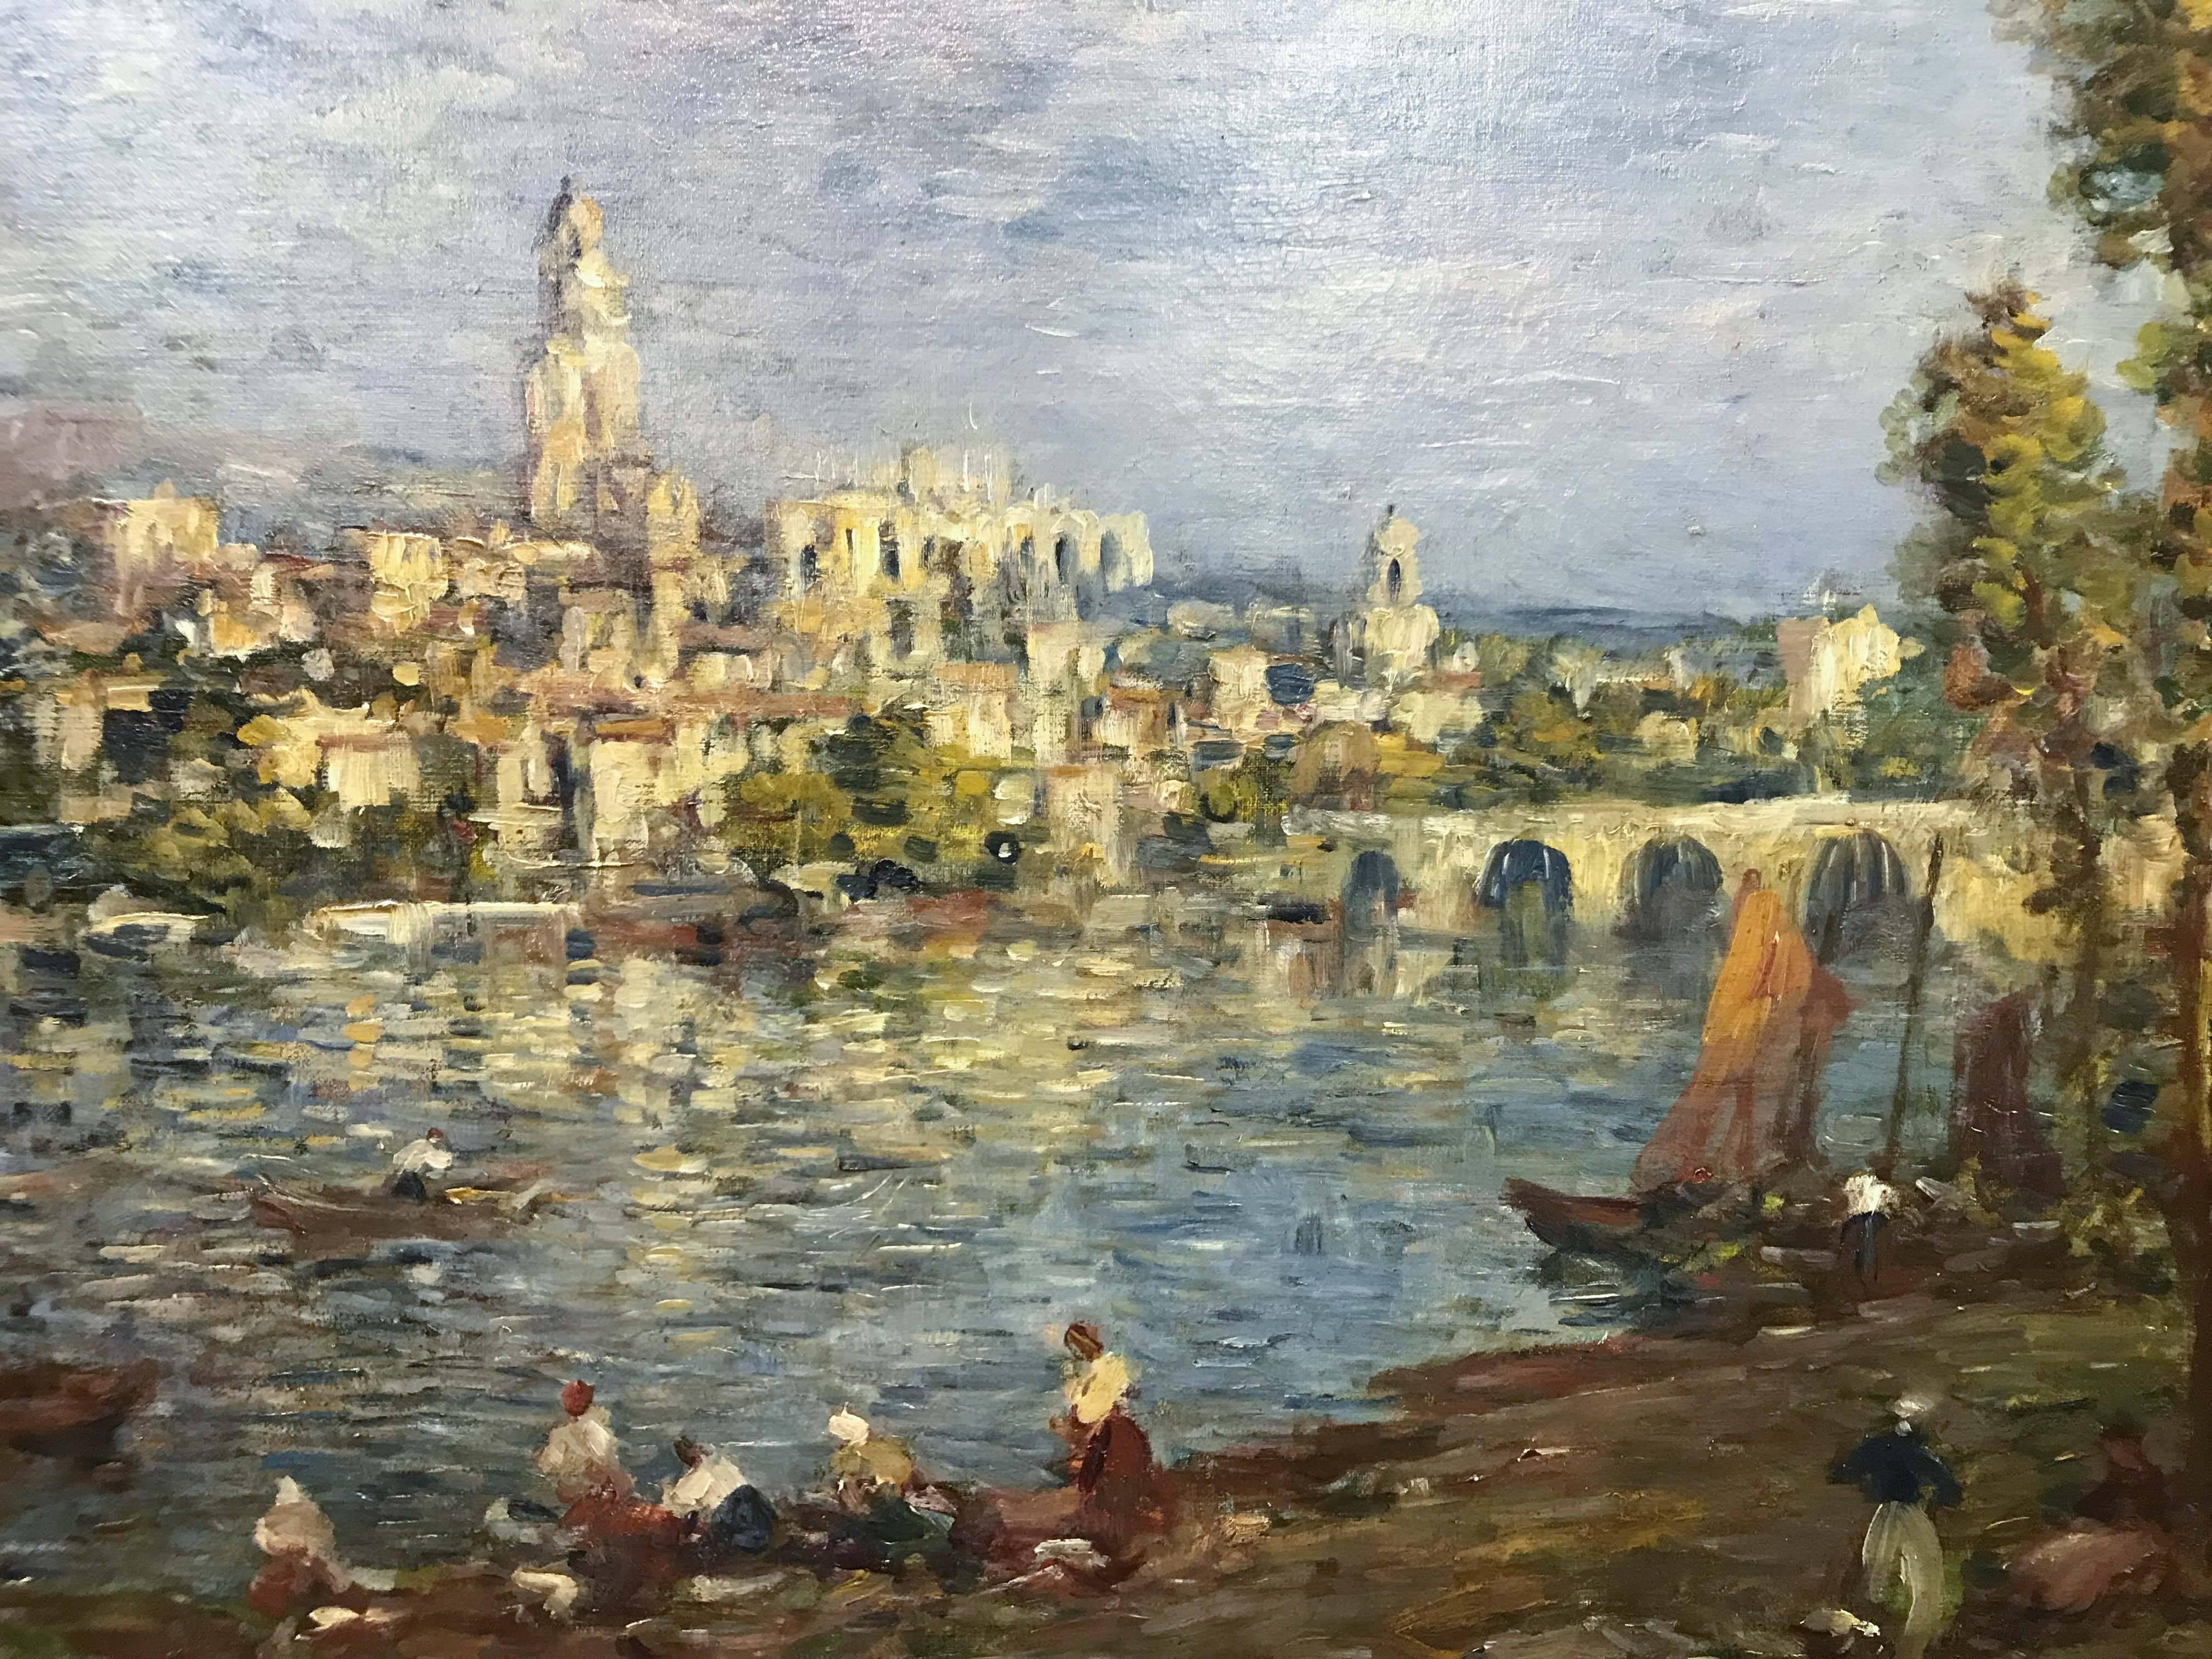 Impressionist painting of what appears to be Old Waterloo Bridge. This piece is in the manner of the artist and of the period but is not attributed to Monet, though it is signed 